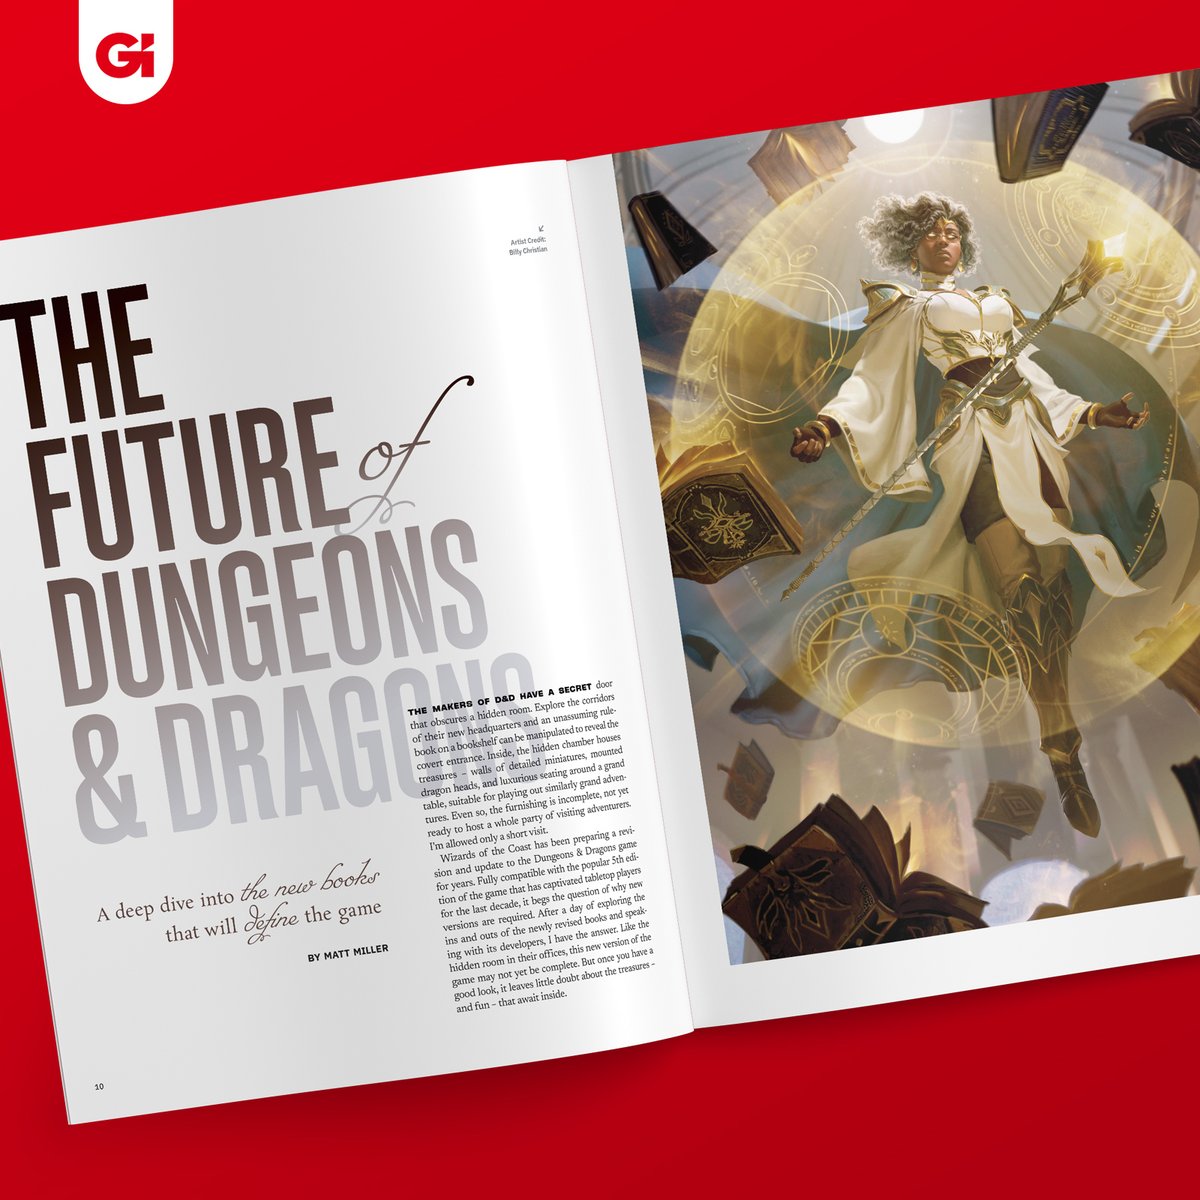 Our new issue has a blowout feature on the future of Dungeons & Dragons from @Wizards_DnD including a first look at the new Player's Handbook. Subscribe to Game Informer for less than $2 an issue, and get this first-look article in your mailbox. subscription.gameinformer.com